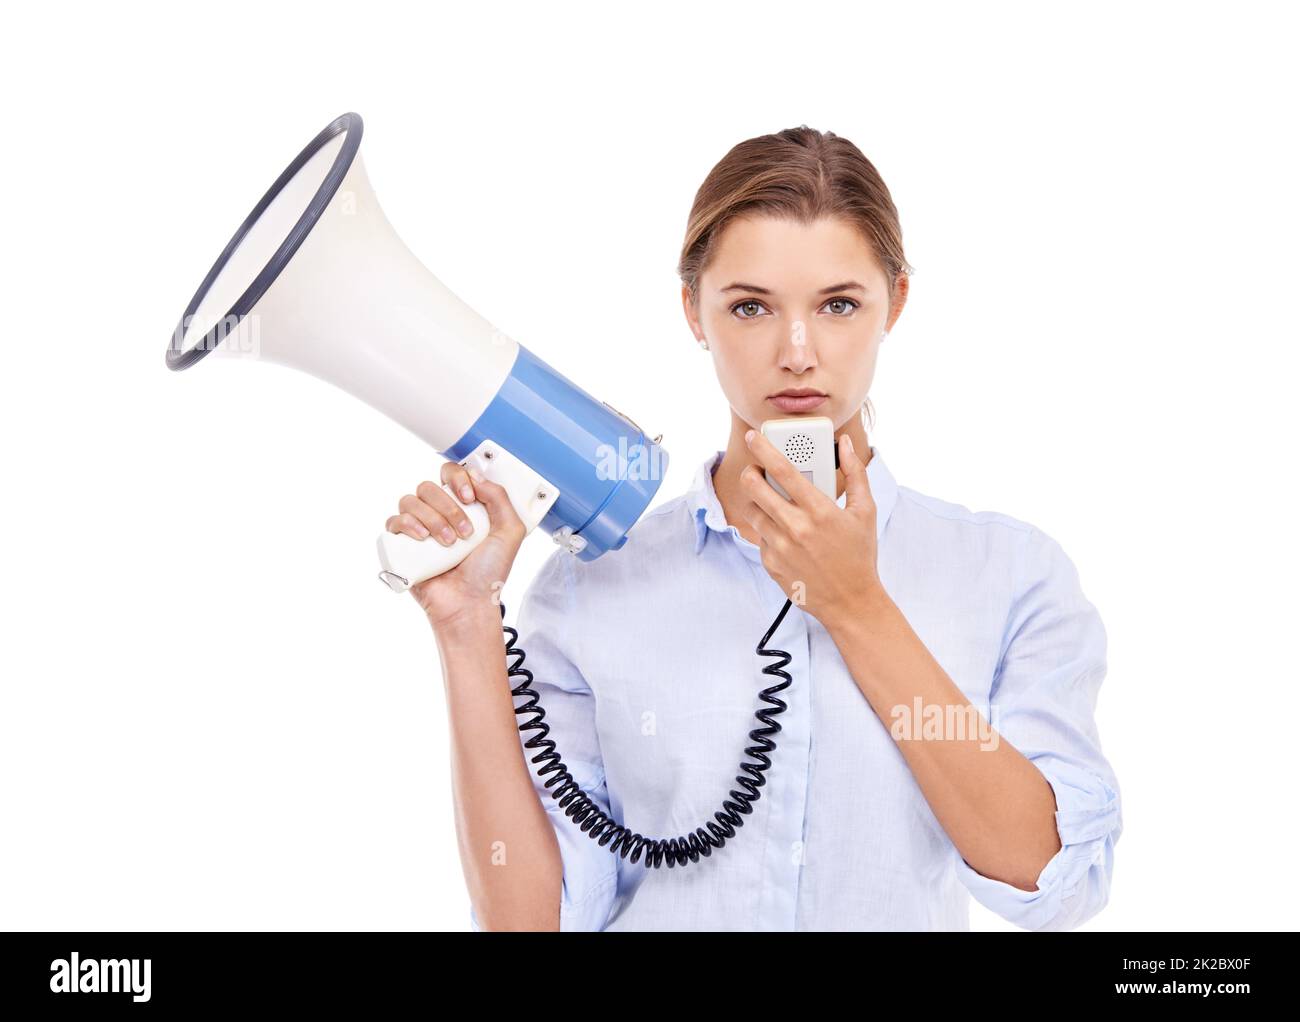 Shes got something to say. Portrait of an attractive young woman holding a megaphone. Stock Photo